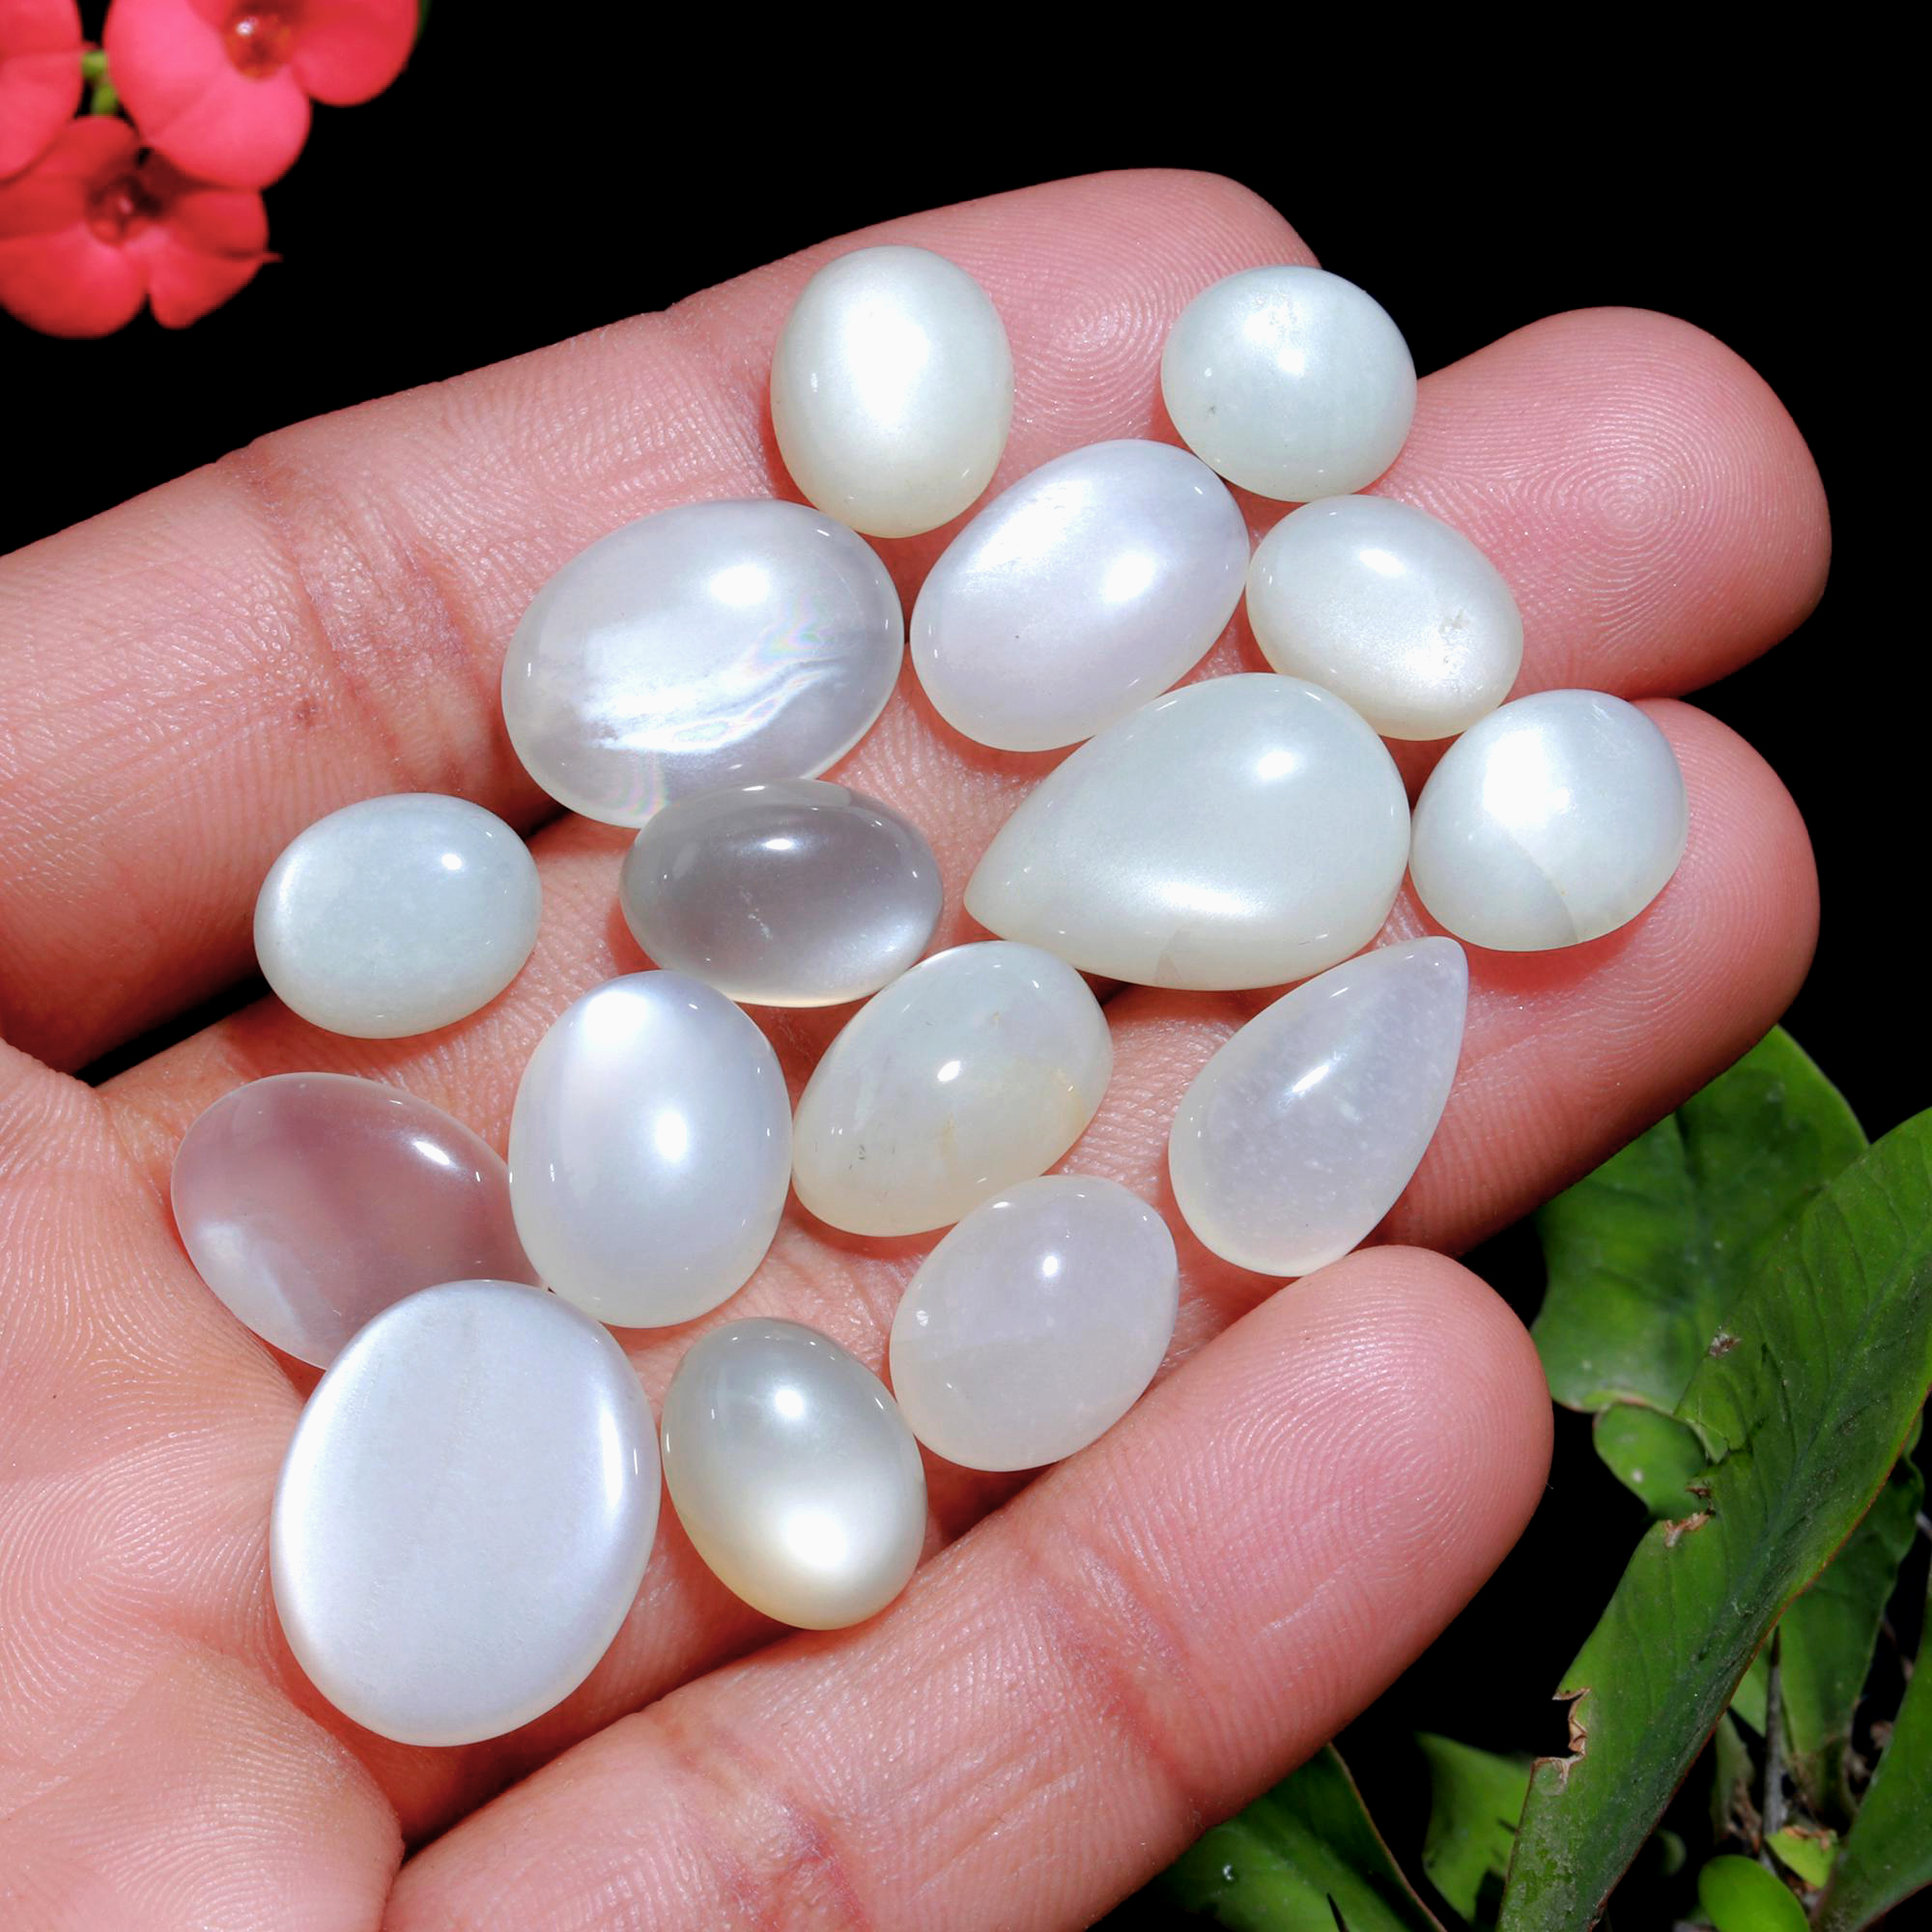 30 Pcs. 166Cts. Natural White Rainbow Moonstone polished Mix Cabochon Wholesale Loose Lot Size 18x14 11x9mm Gemstone for jewelry